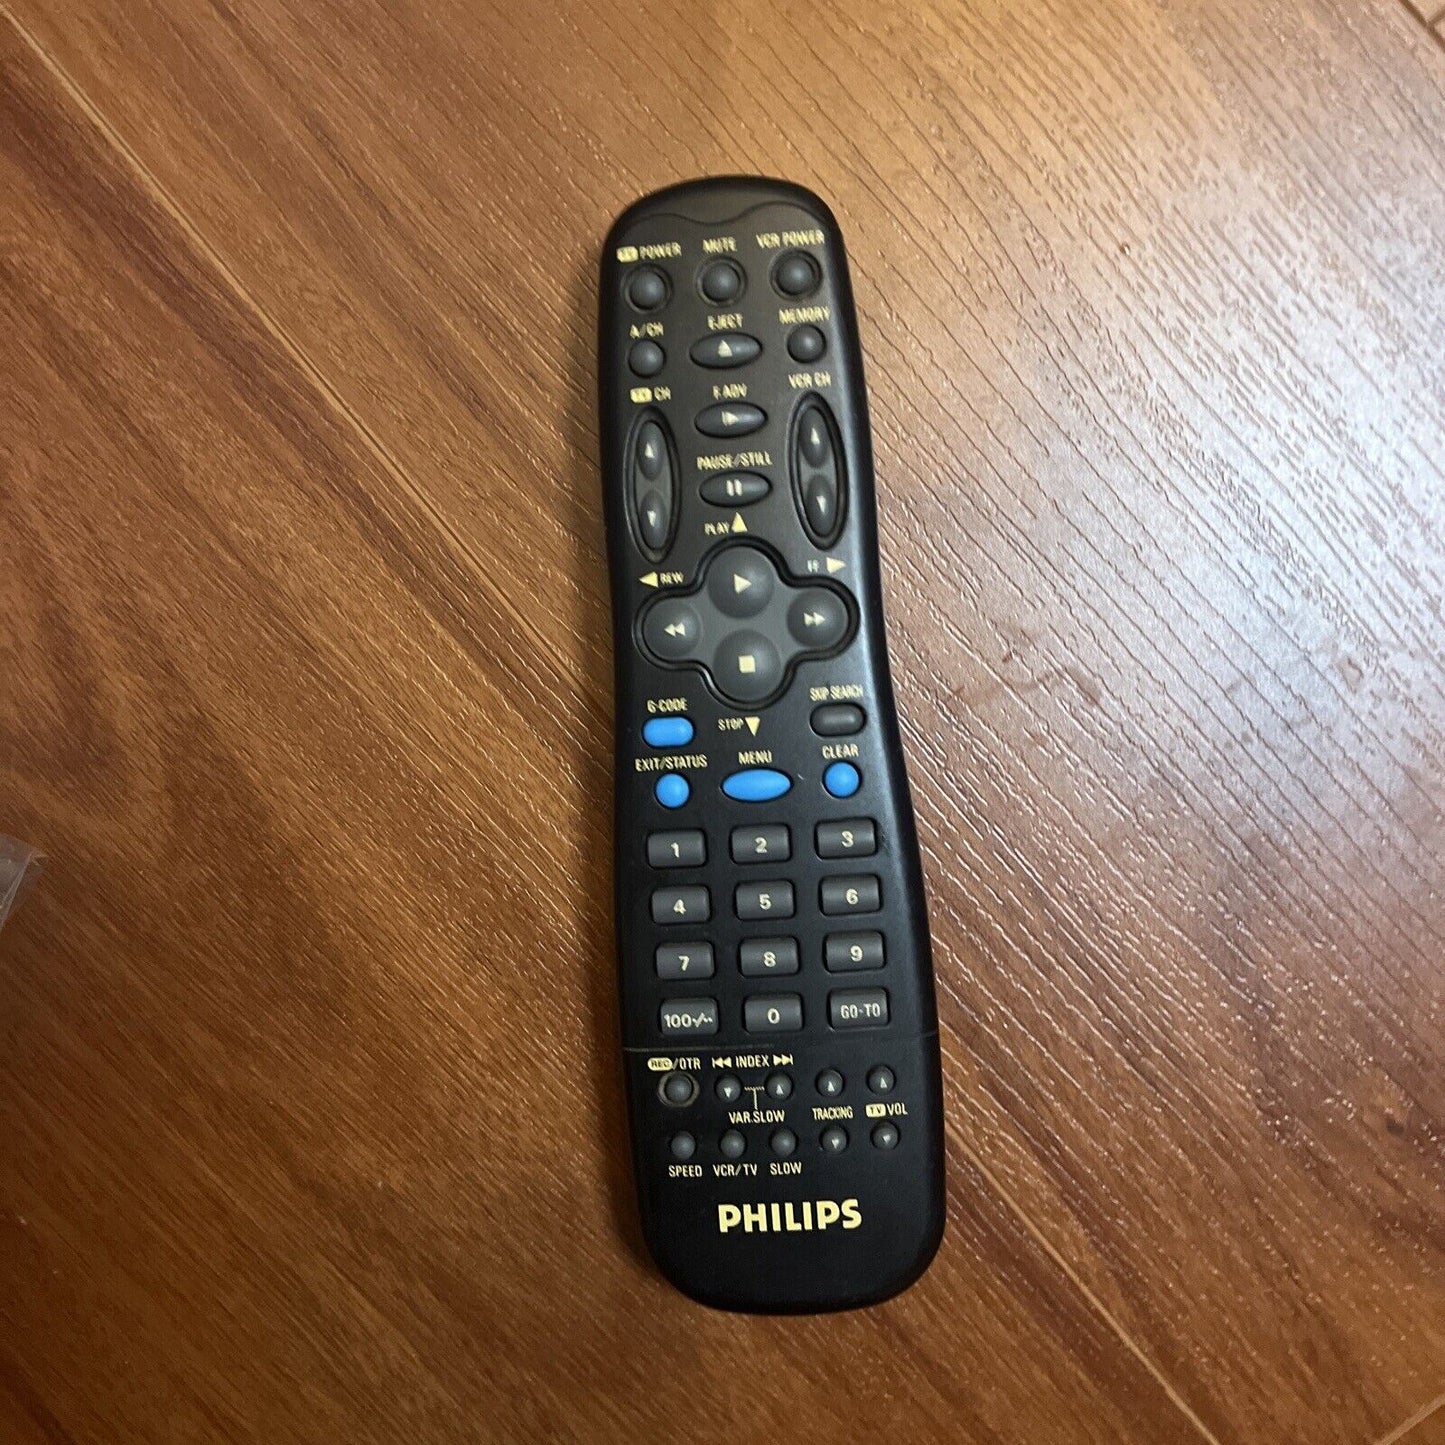 Genuine Philips Remote Control for TV VCR *Missing Battery Cover*